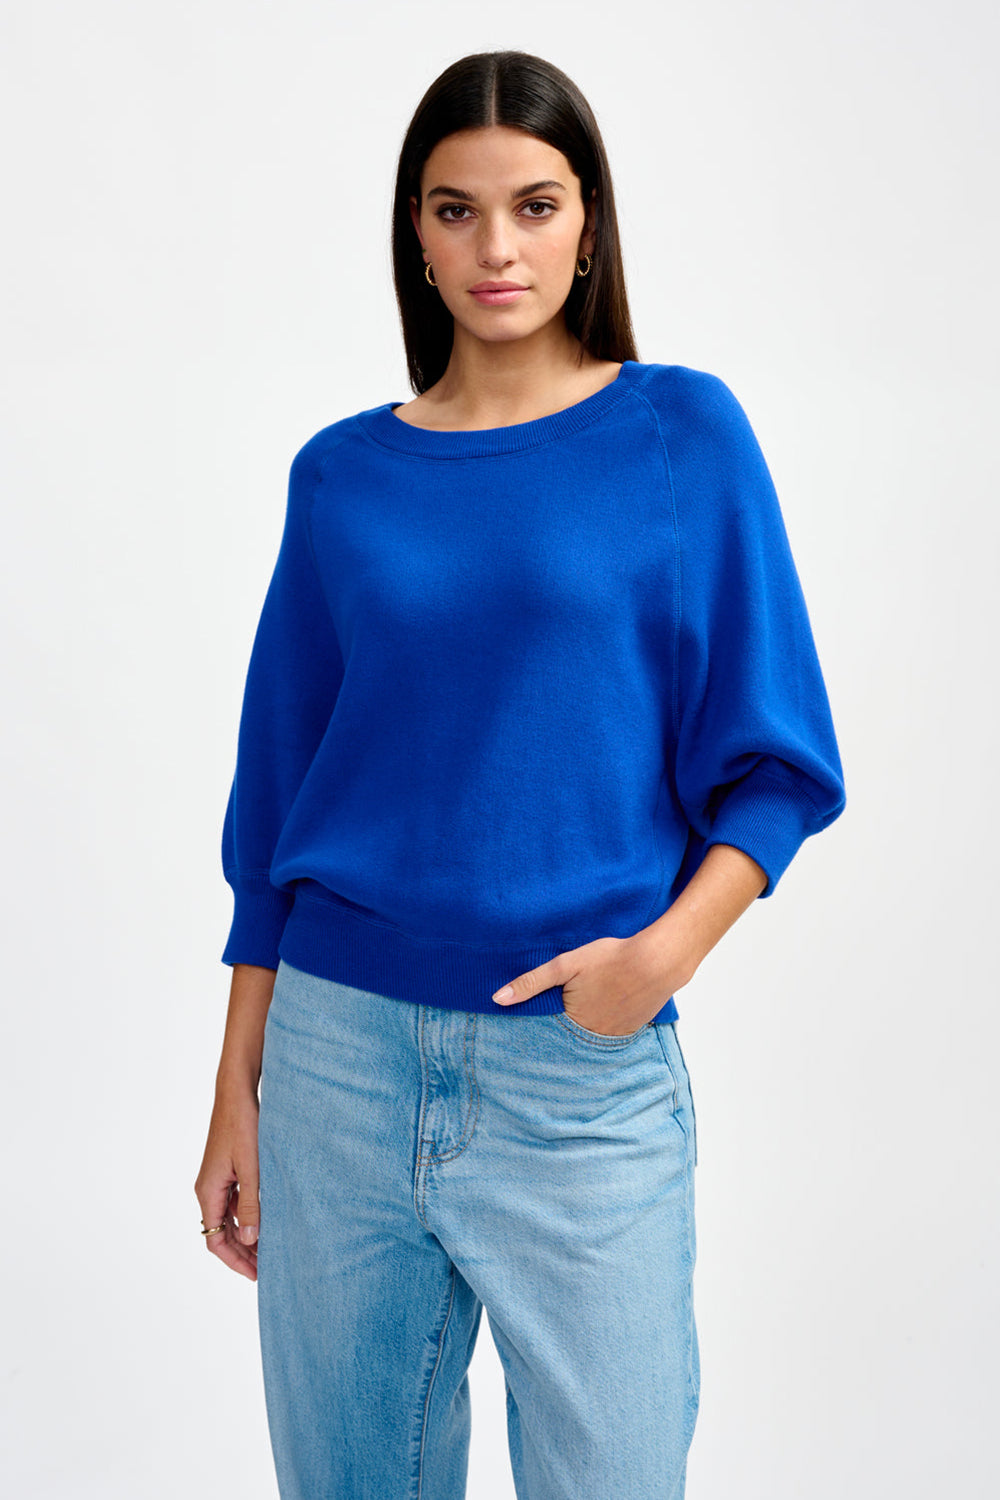 Women's Clothing New Arrivals | The standard Store – The Standard Store